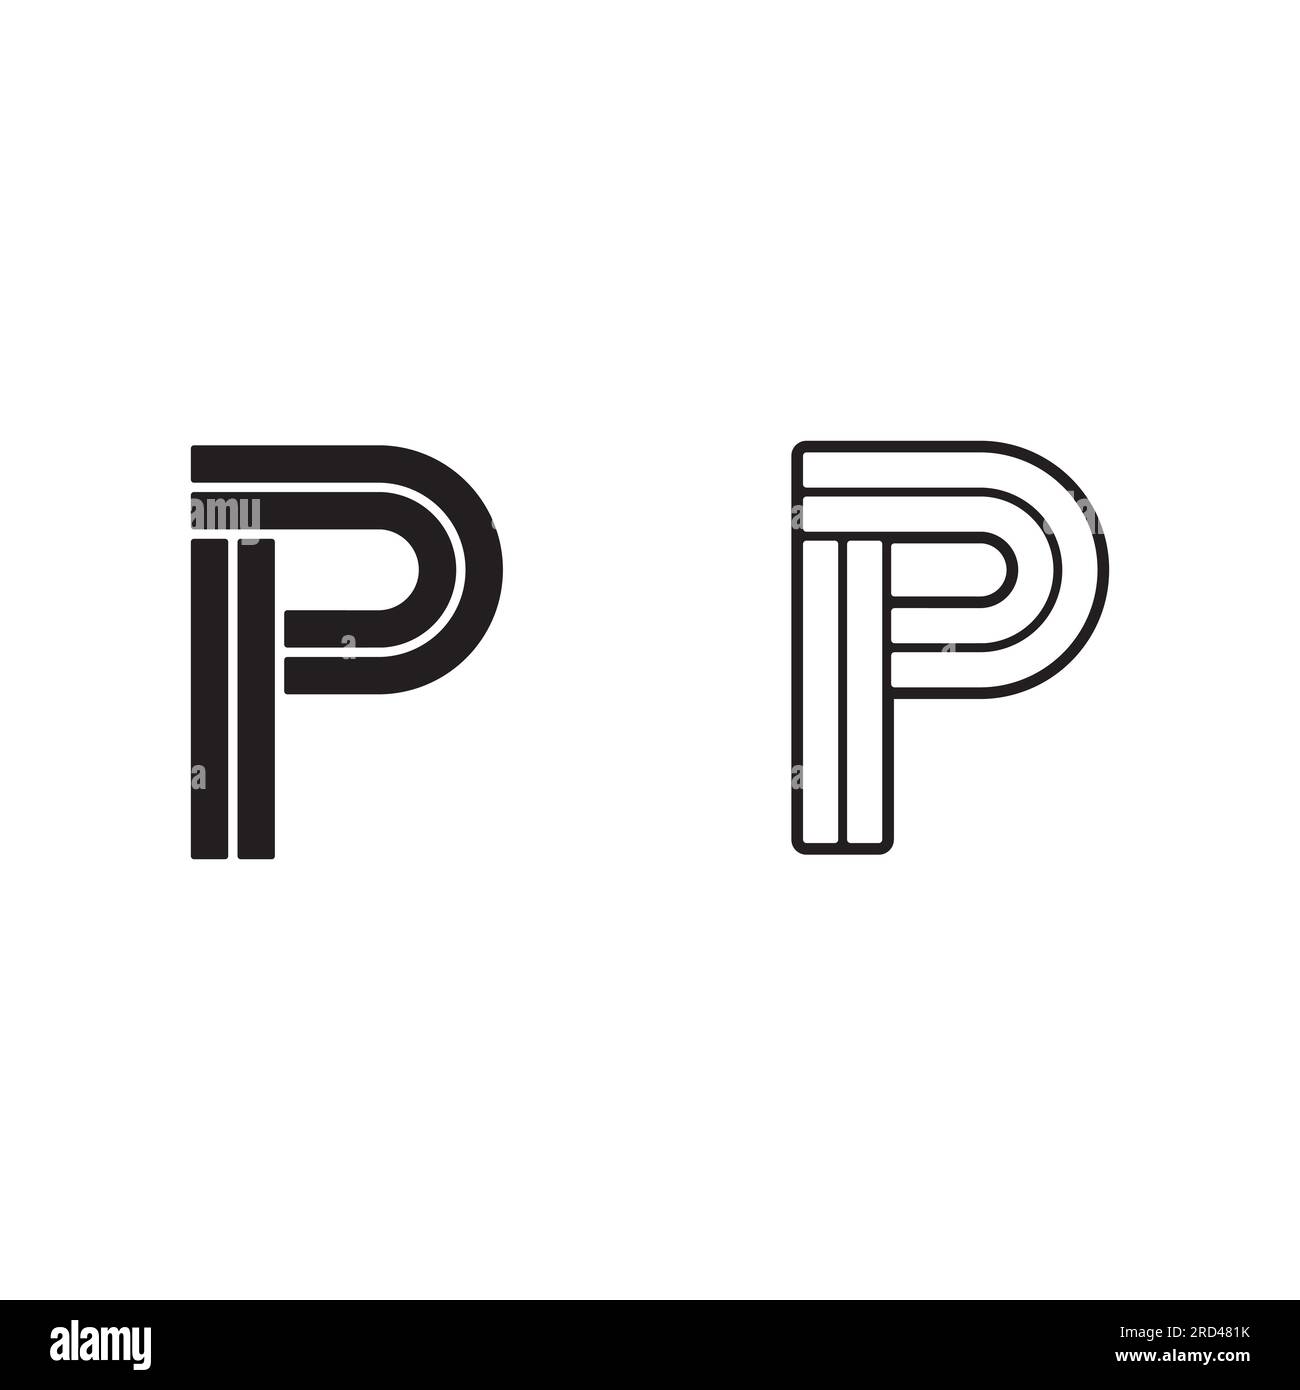 Initial Letter PS Logo - Minimal Business Logo for Alphabet P and